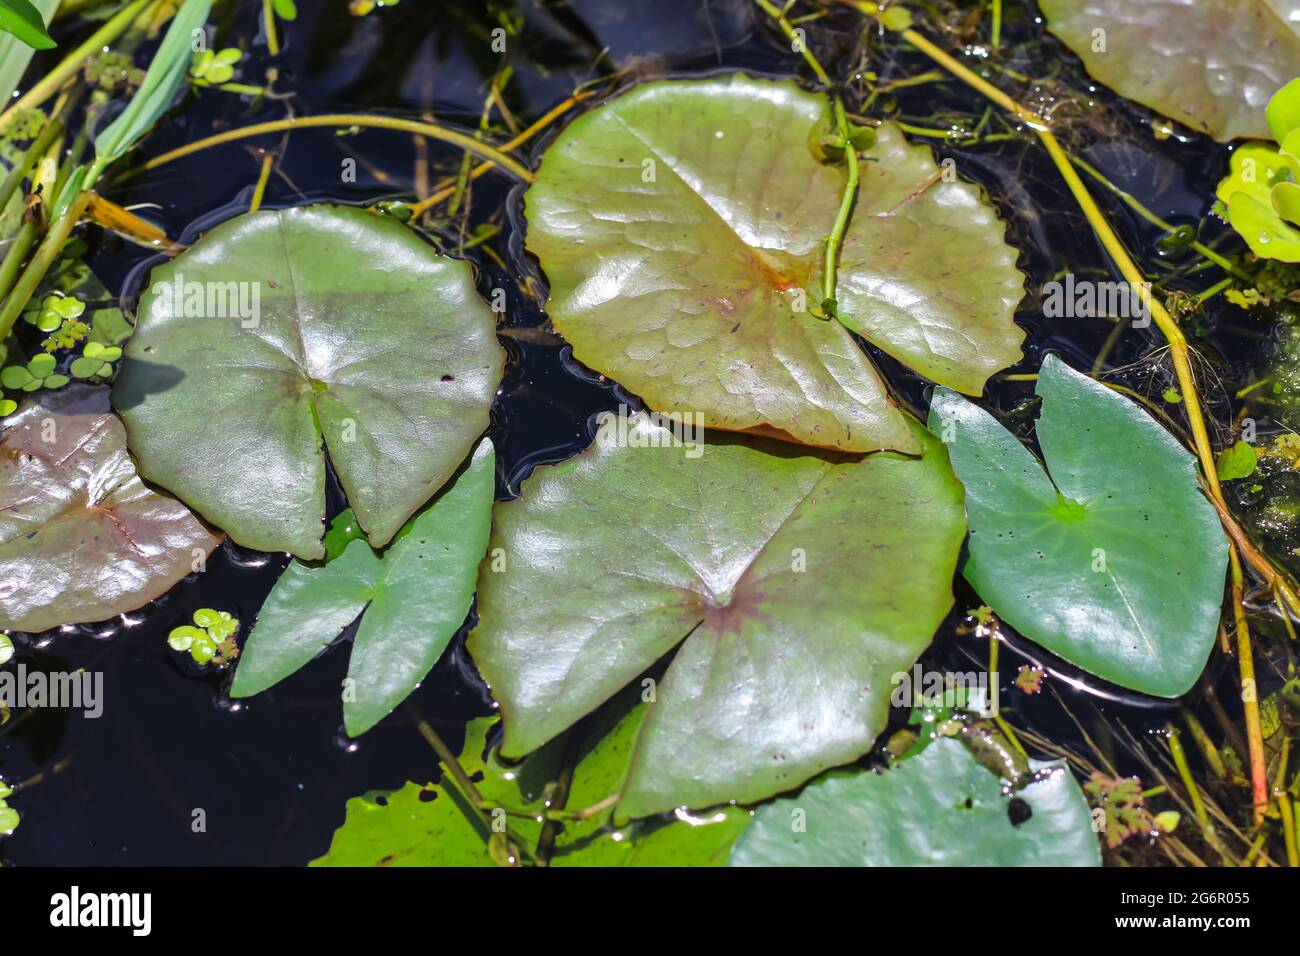 Green leaf over the water for wallpaper. Leaves on water background. Stock Photo